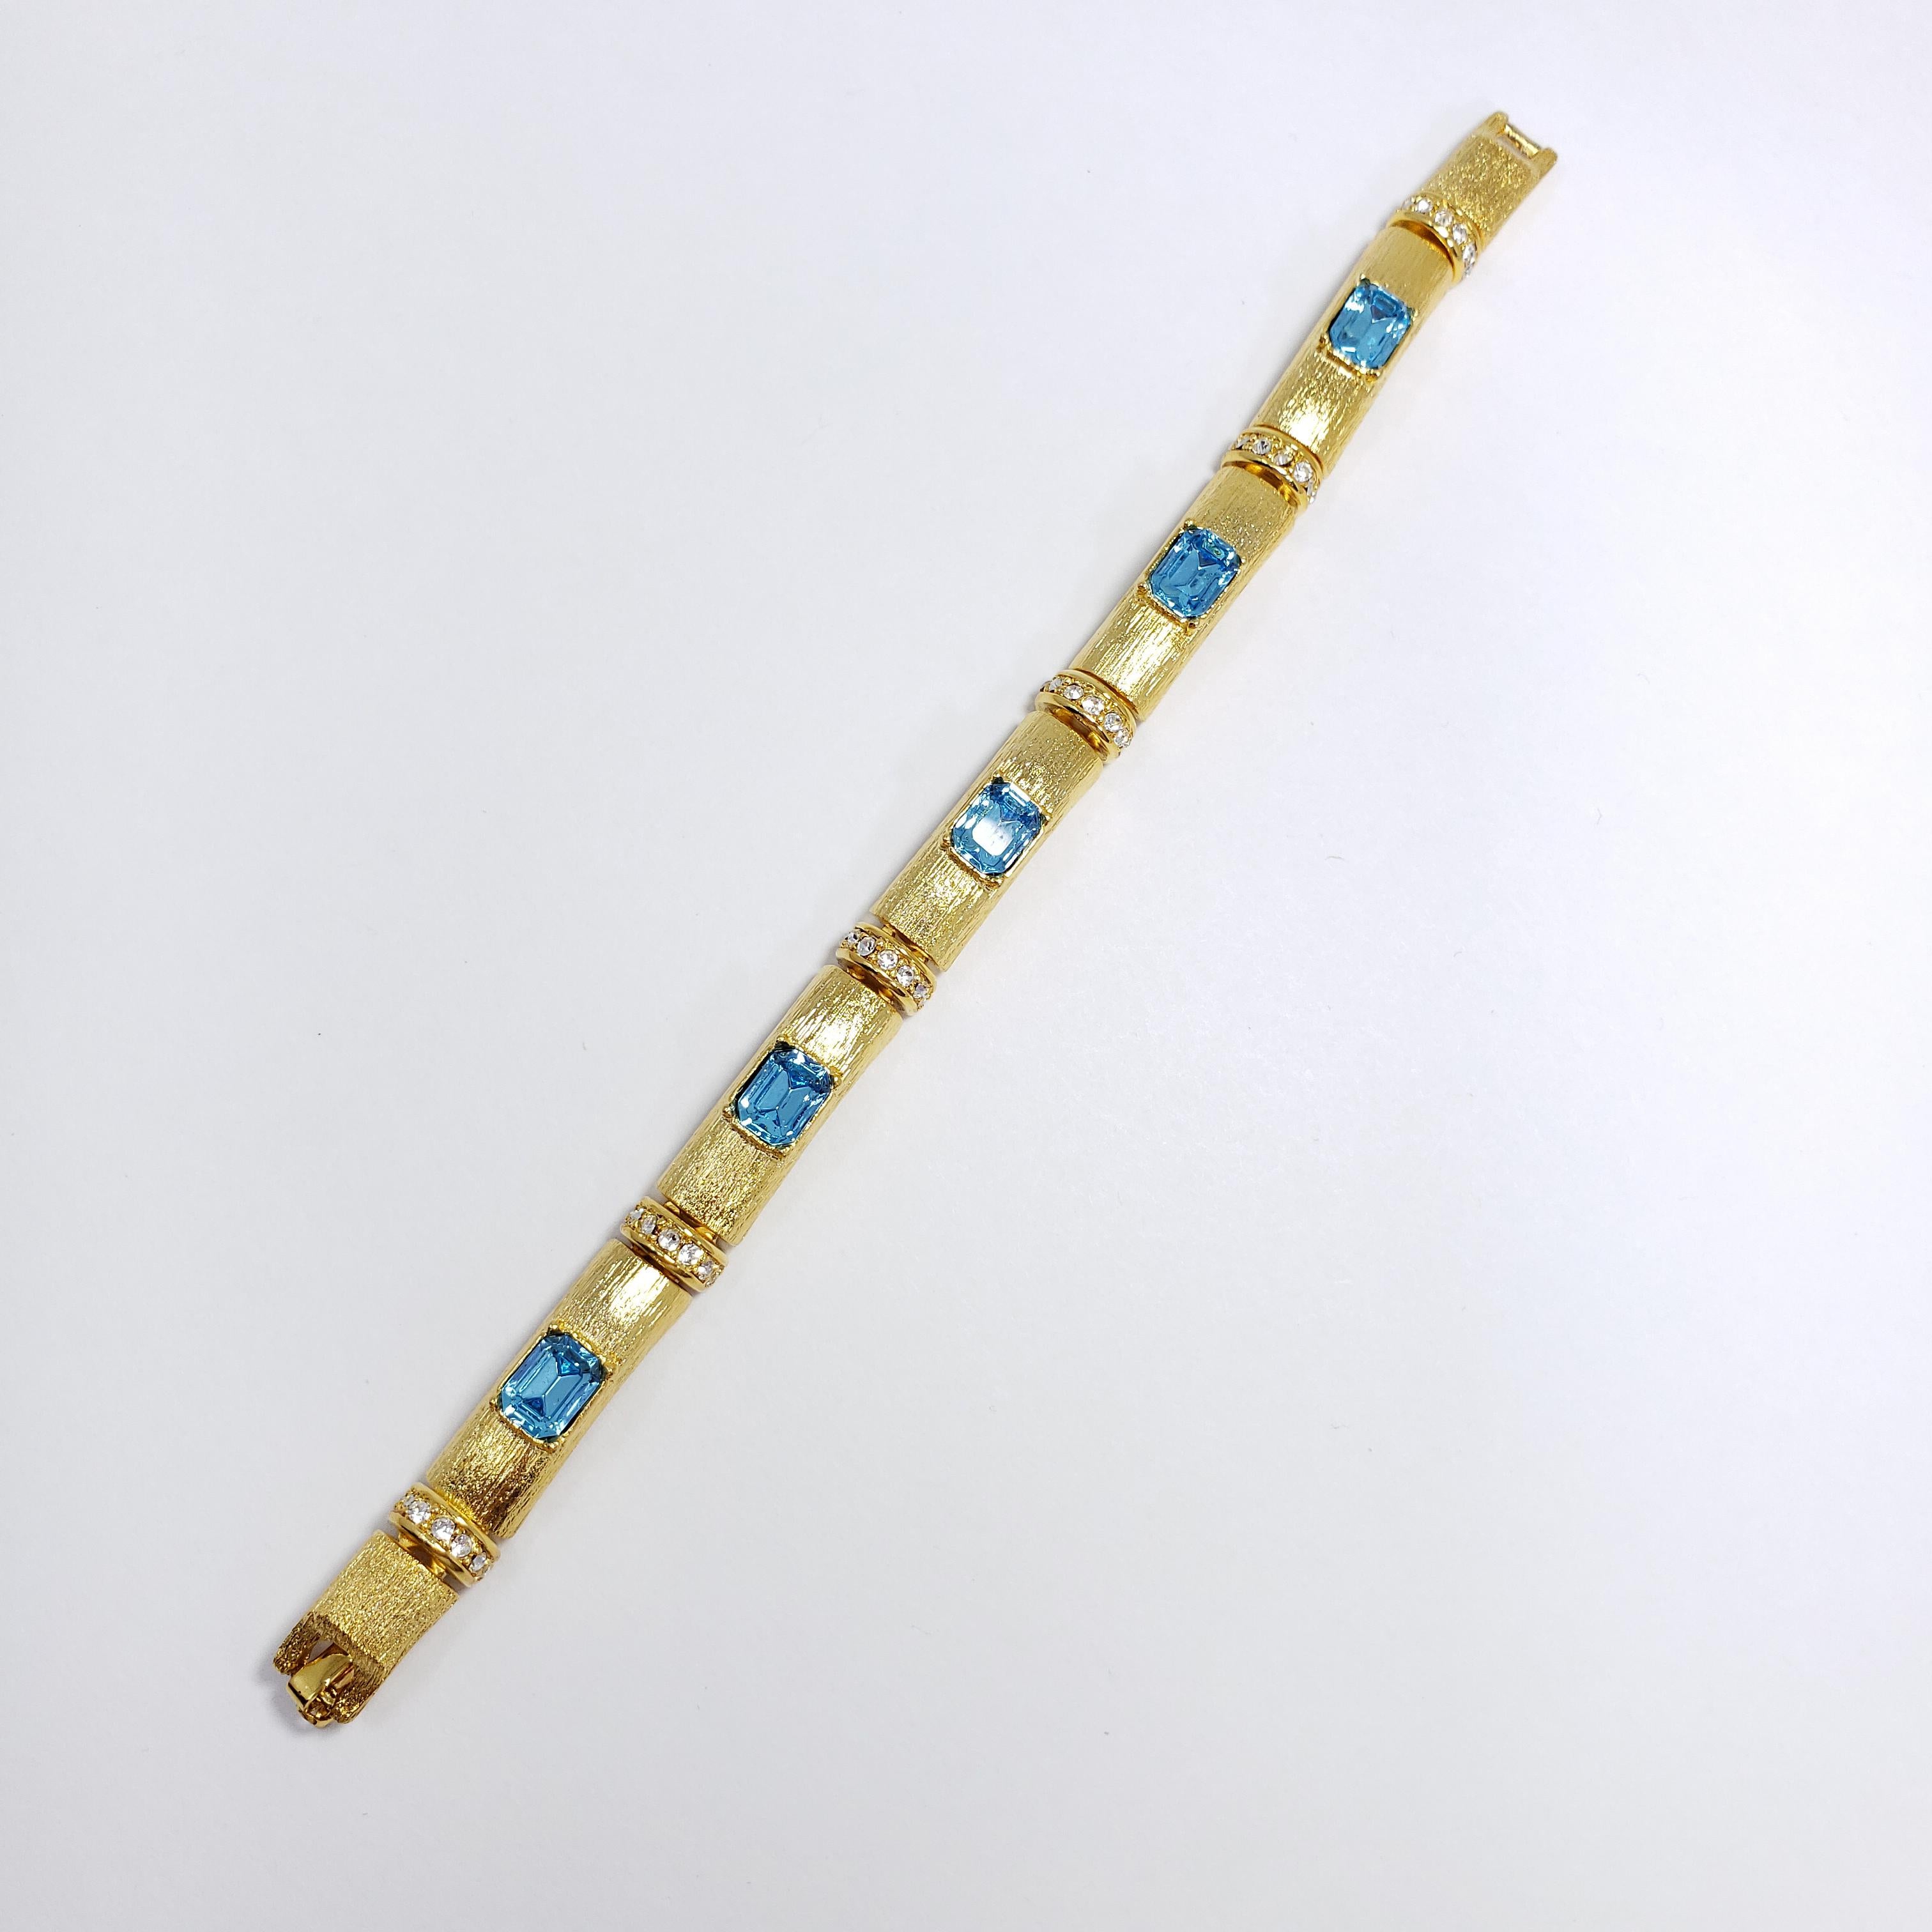 A stylish Kenneth Jay Lane bracelet in gold tone, featuring linked textured segments accented with clear and blue crystals.

Hallmarks: Kenneth Jay Lane